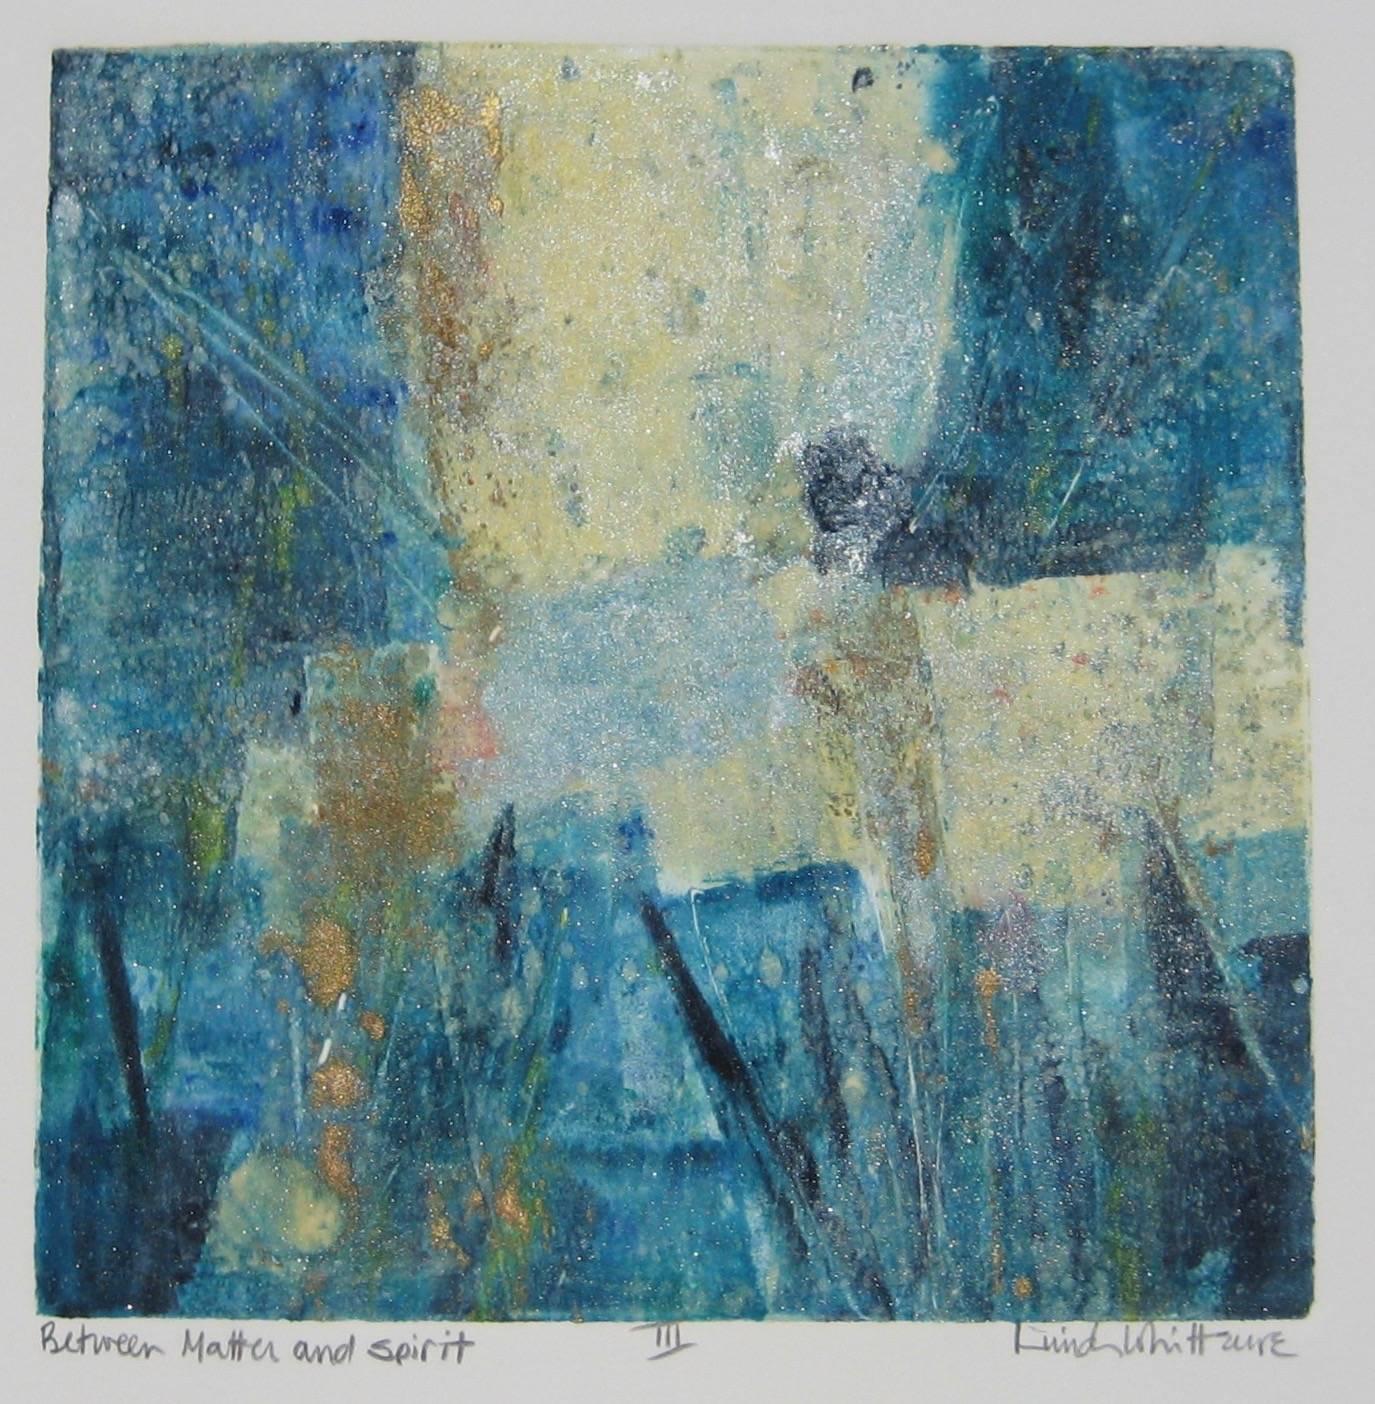 Rich blues and sea greens are streaked with pearlescent accents that play across this beautiful abstract original work "Between matter and Spirit III" by master print maker Linda Whittemore. This mixed media viscosity monotype displays all of the